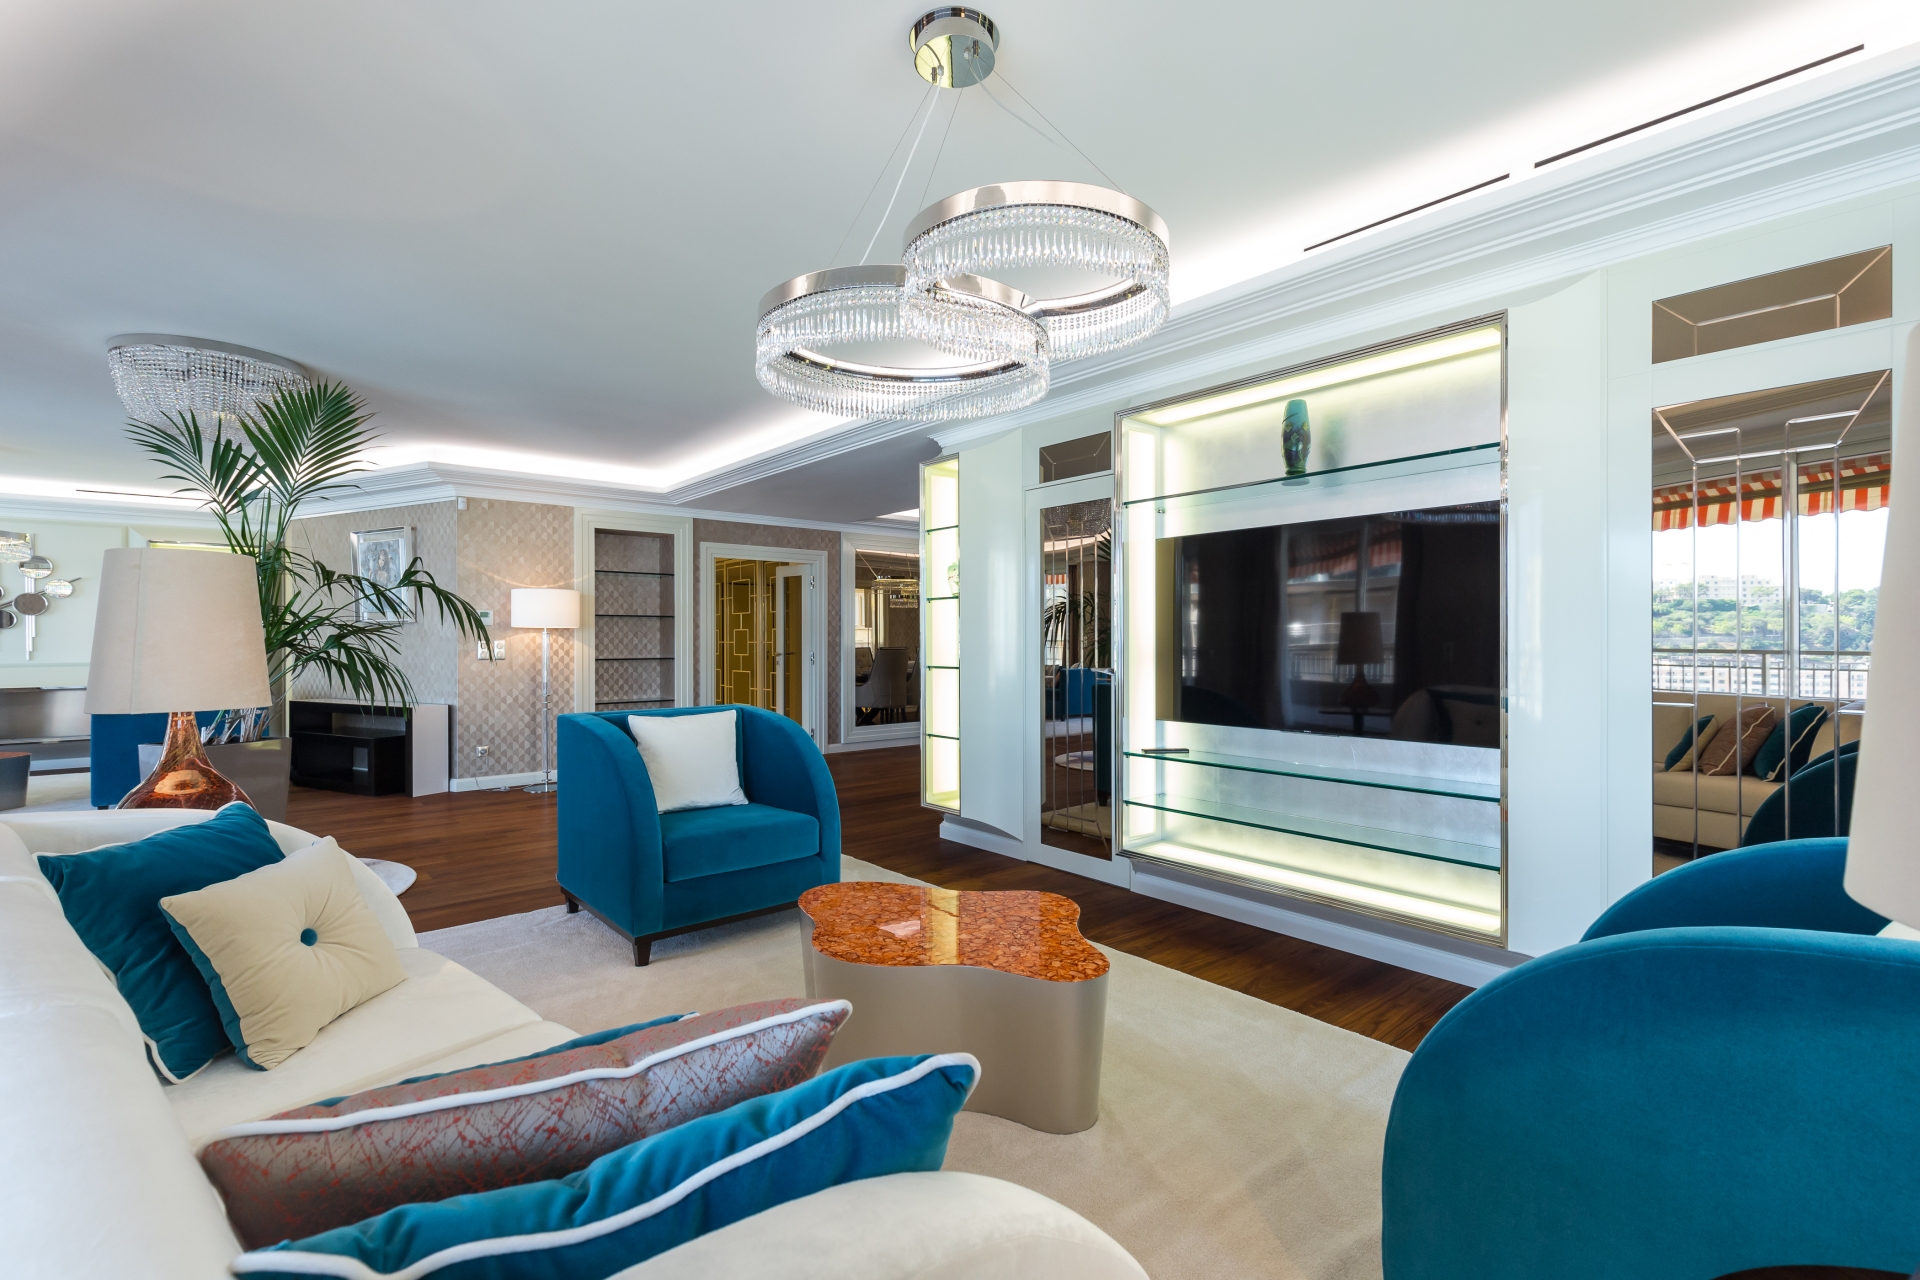 Our pick of the finest family apartments in Monaco